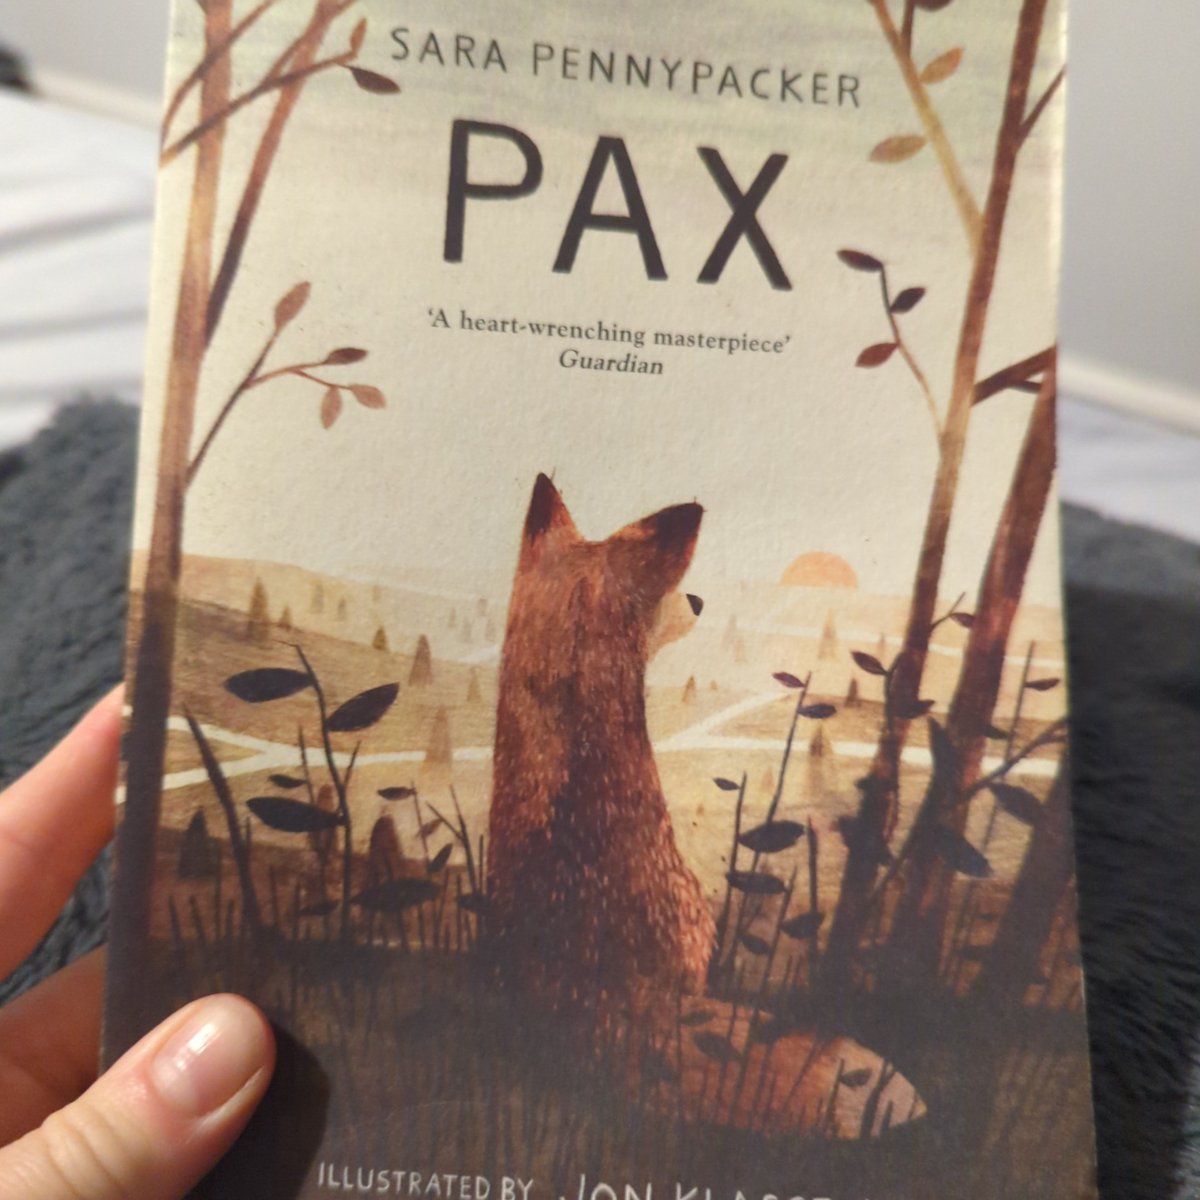 Just finished Pax by @sarapennypacker. What a beautiful book, this will be one of my top recommended reads for year 5/6 pupils. An absolute gem of a book (already looking forward to the follow up)